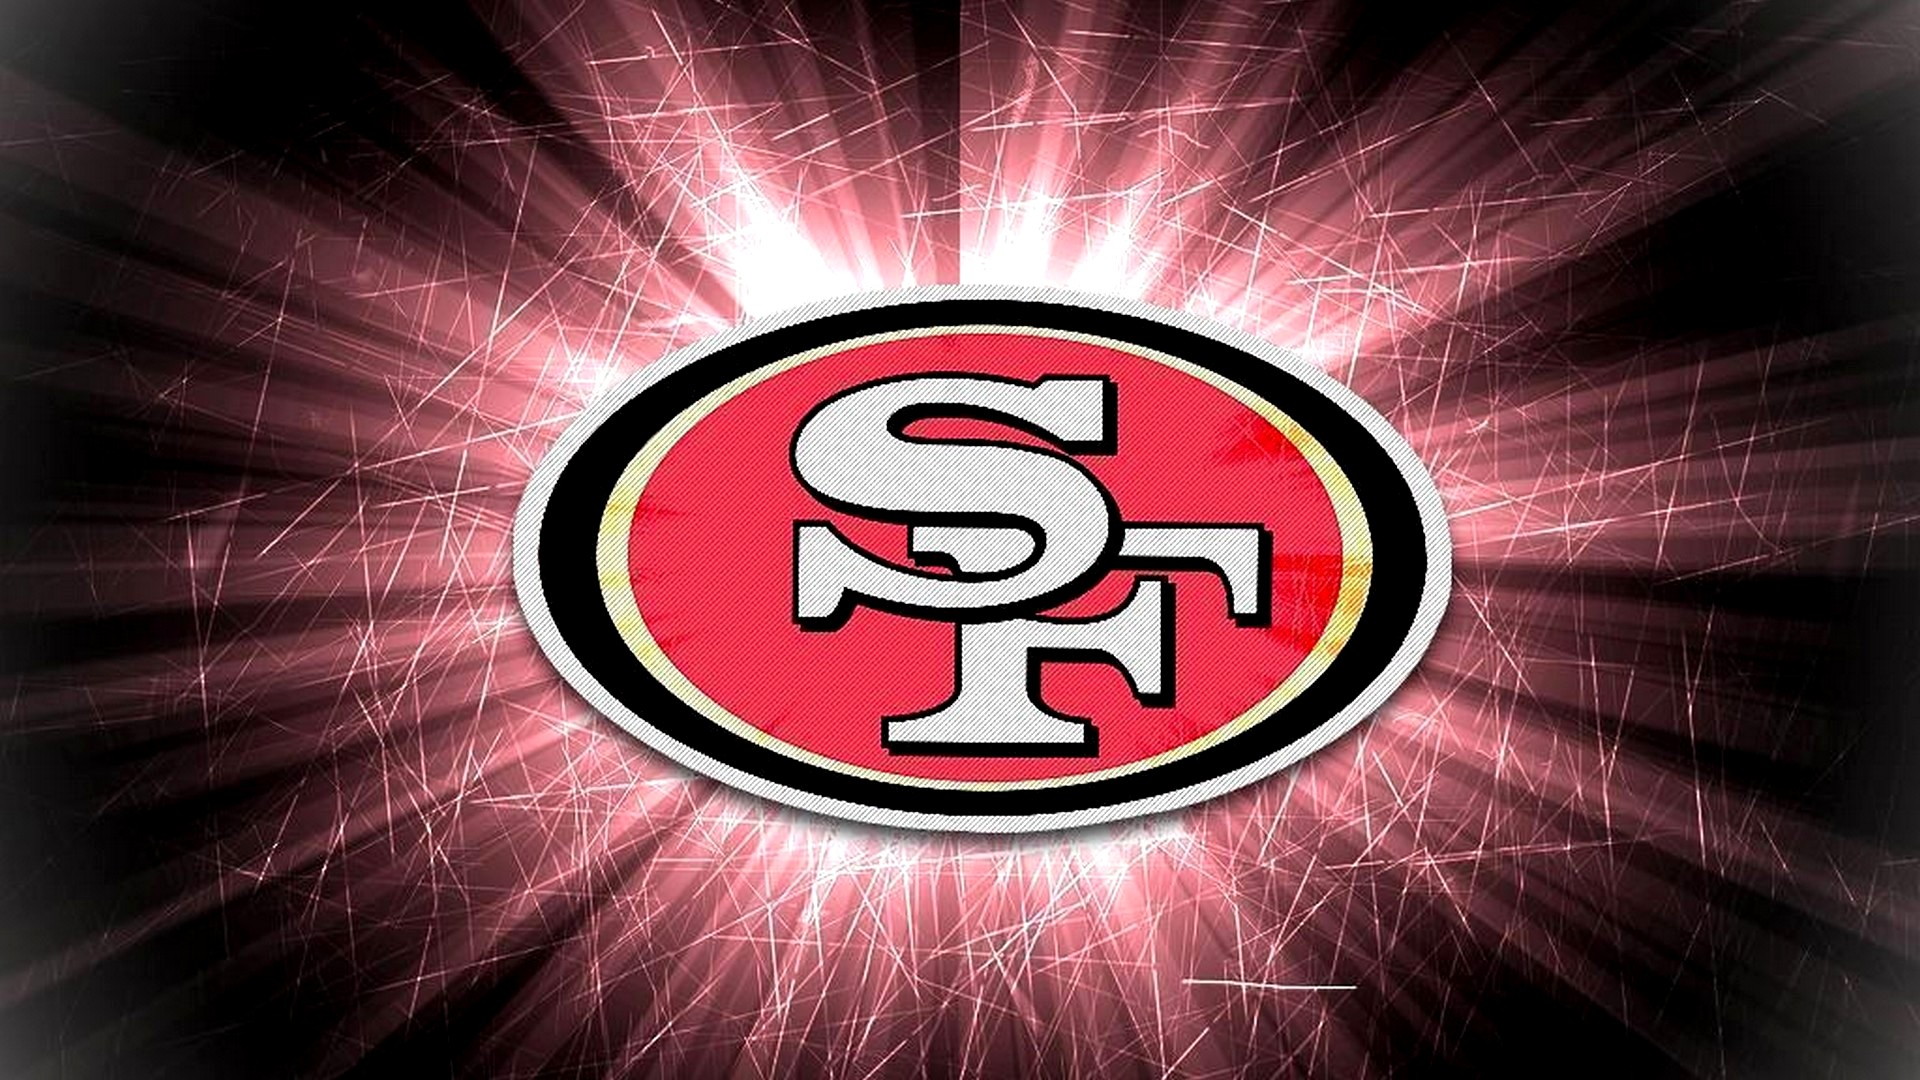 49ers Macbook Backgrounds with high-resolution 1920x1080 pixel. You can use and set as wallpaper for Notebook Screensavers, Mac Wallpapers, Mobile Home Screen, iPhone or Android Phones Lock Screen